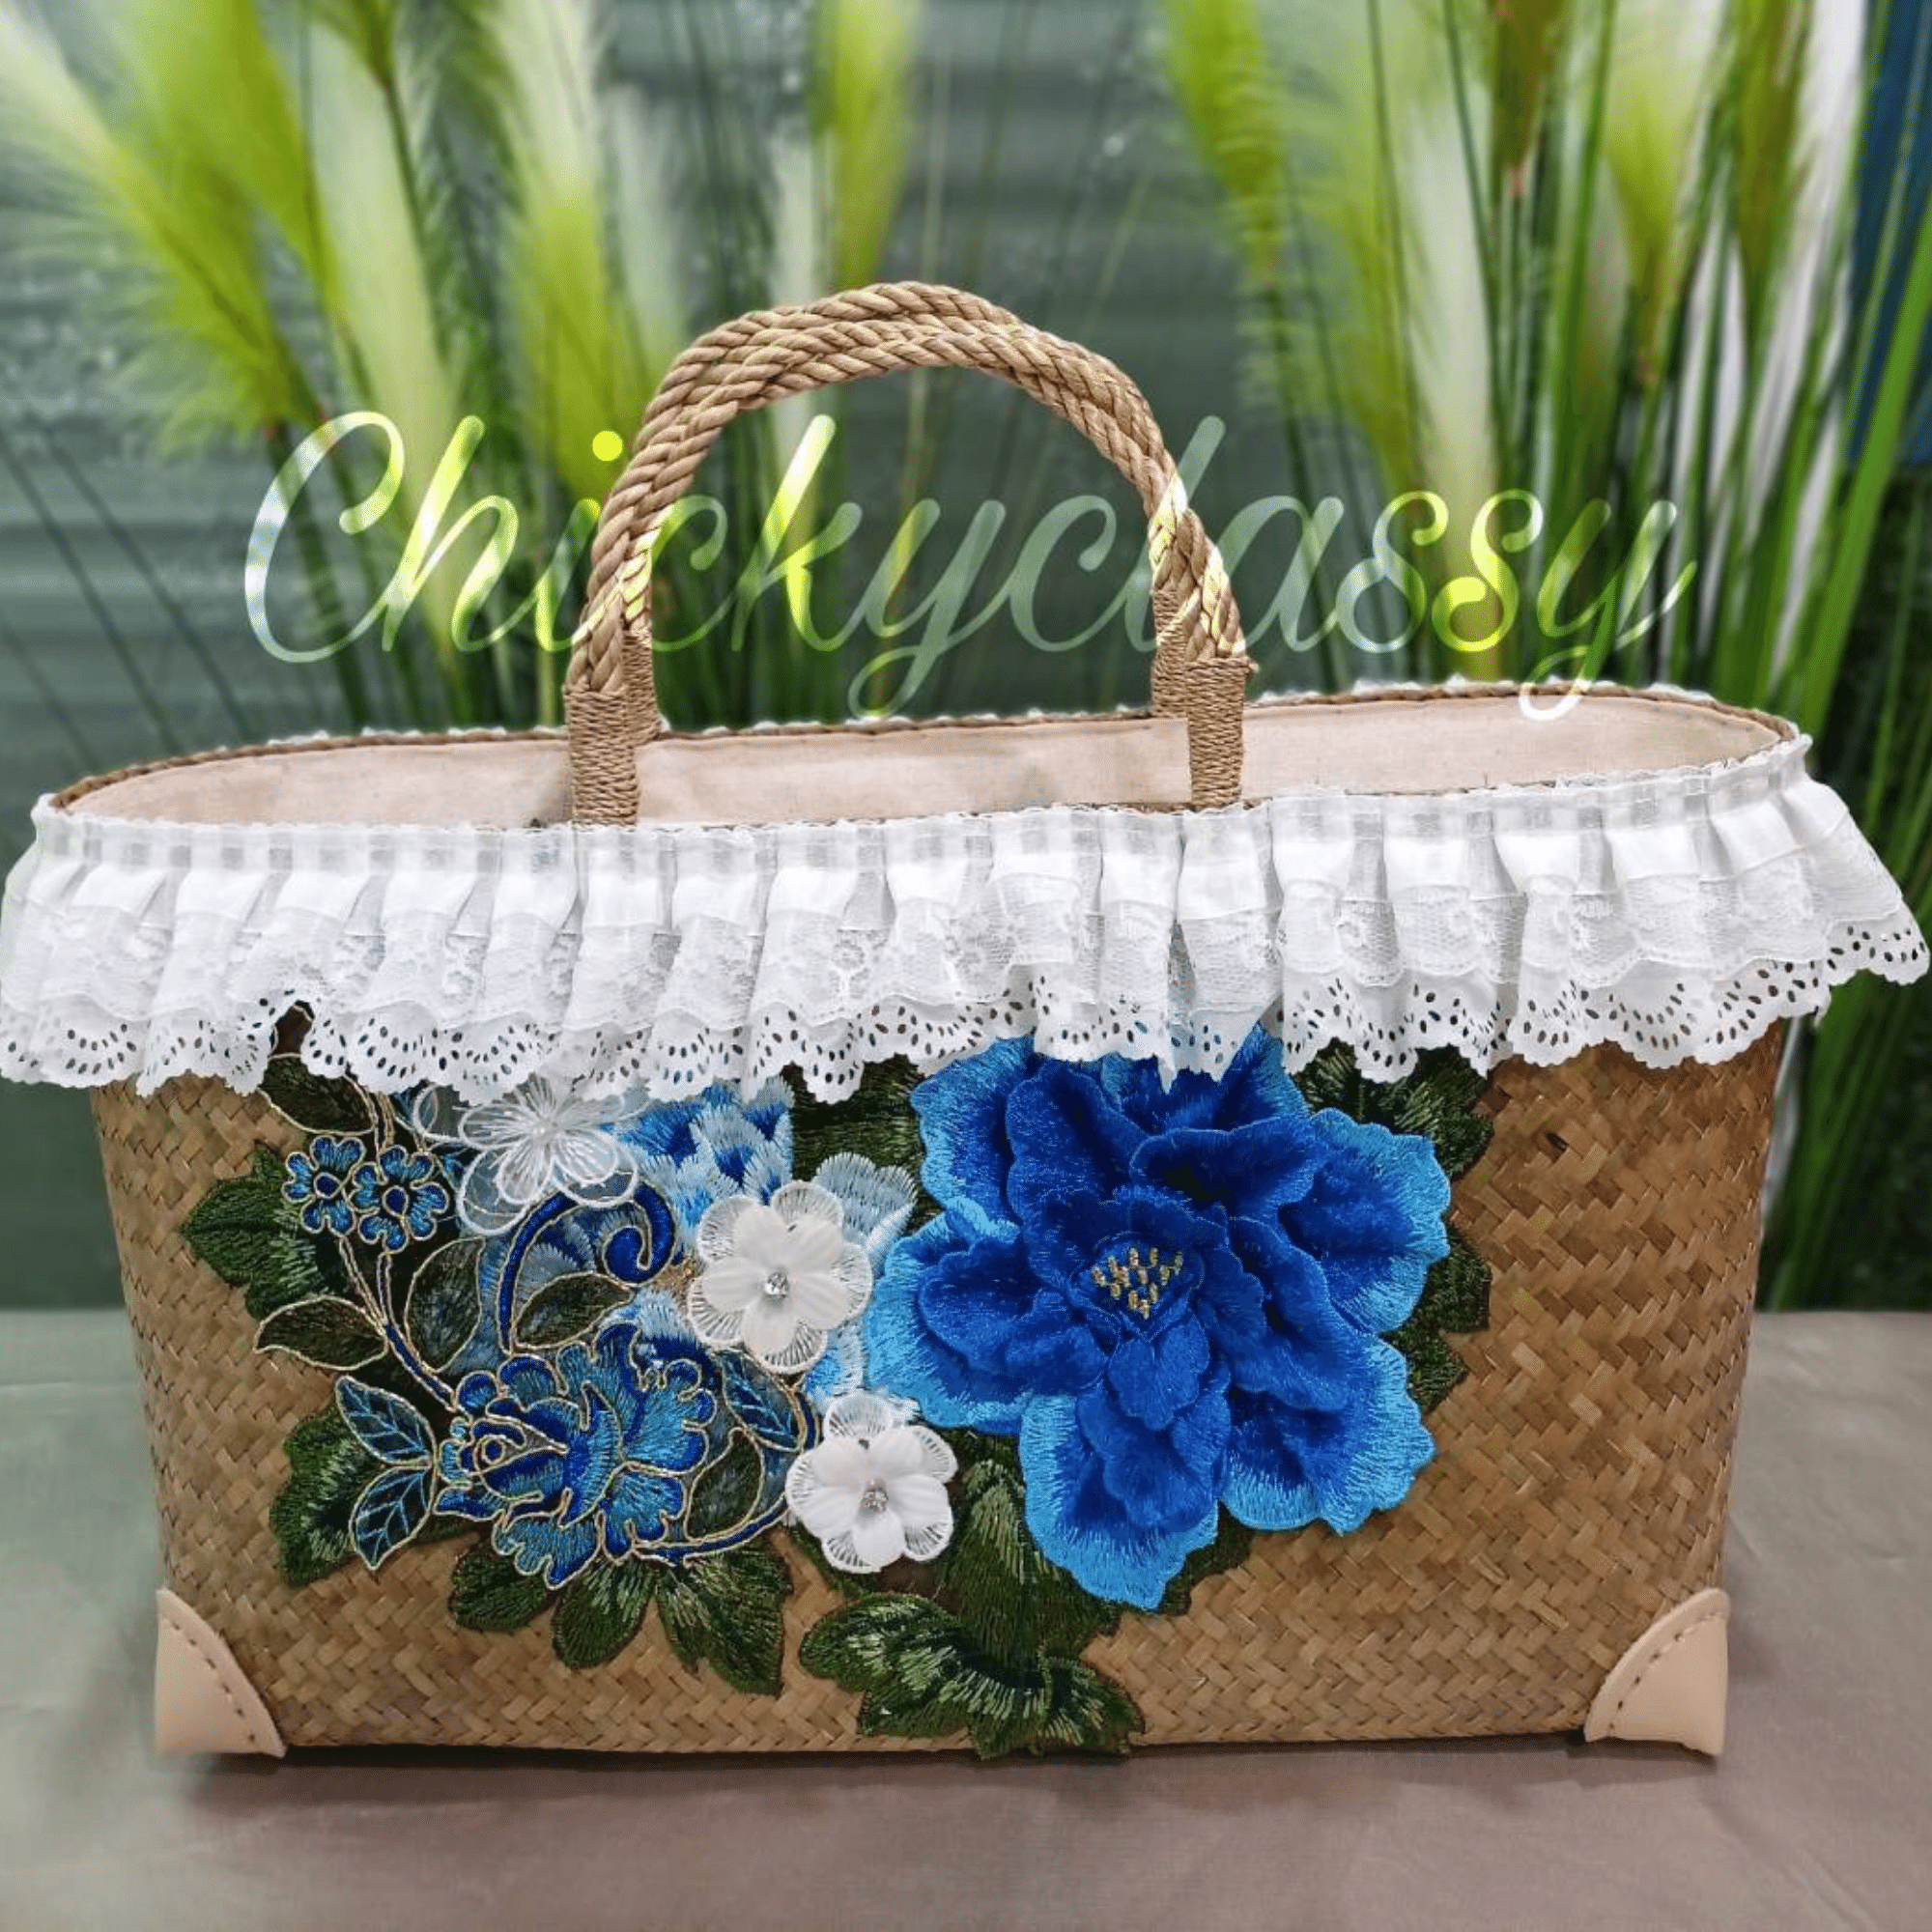 classic Straw bag for all occasions take me with you